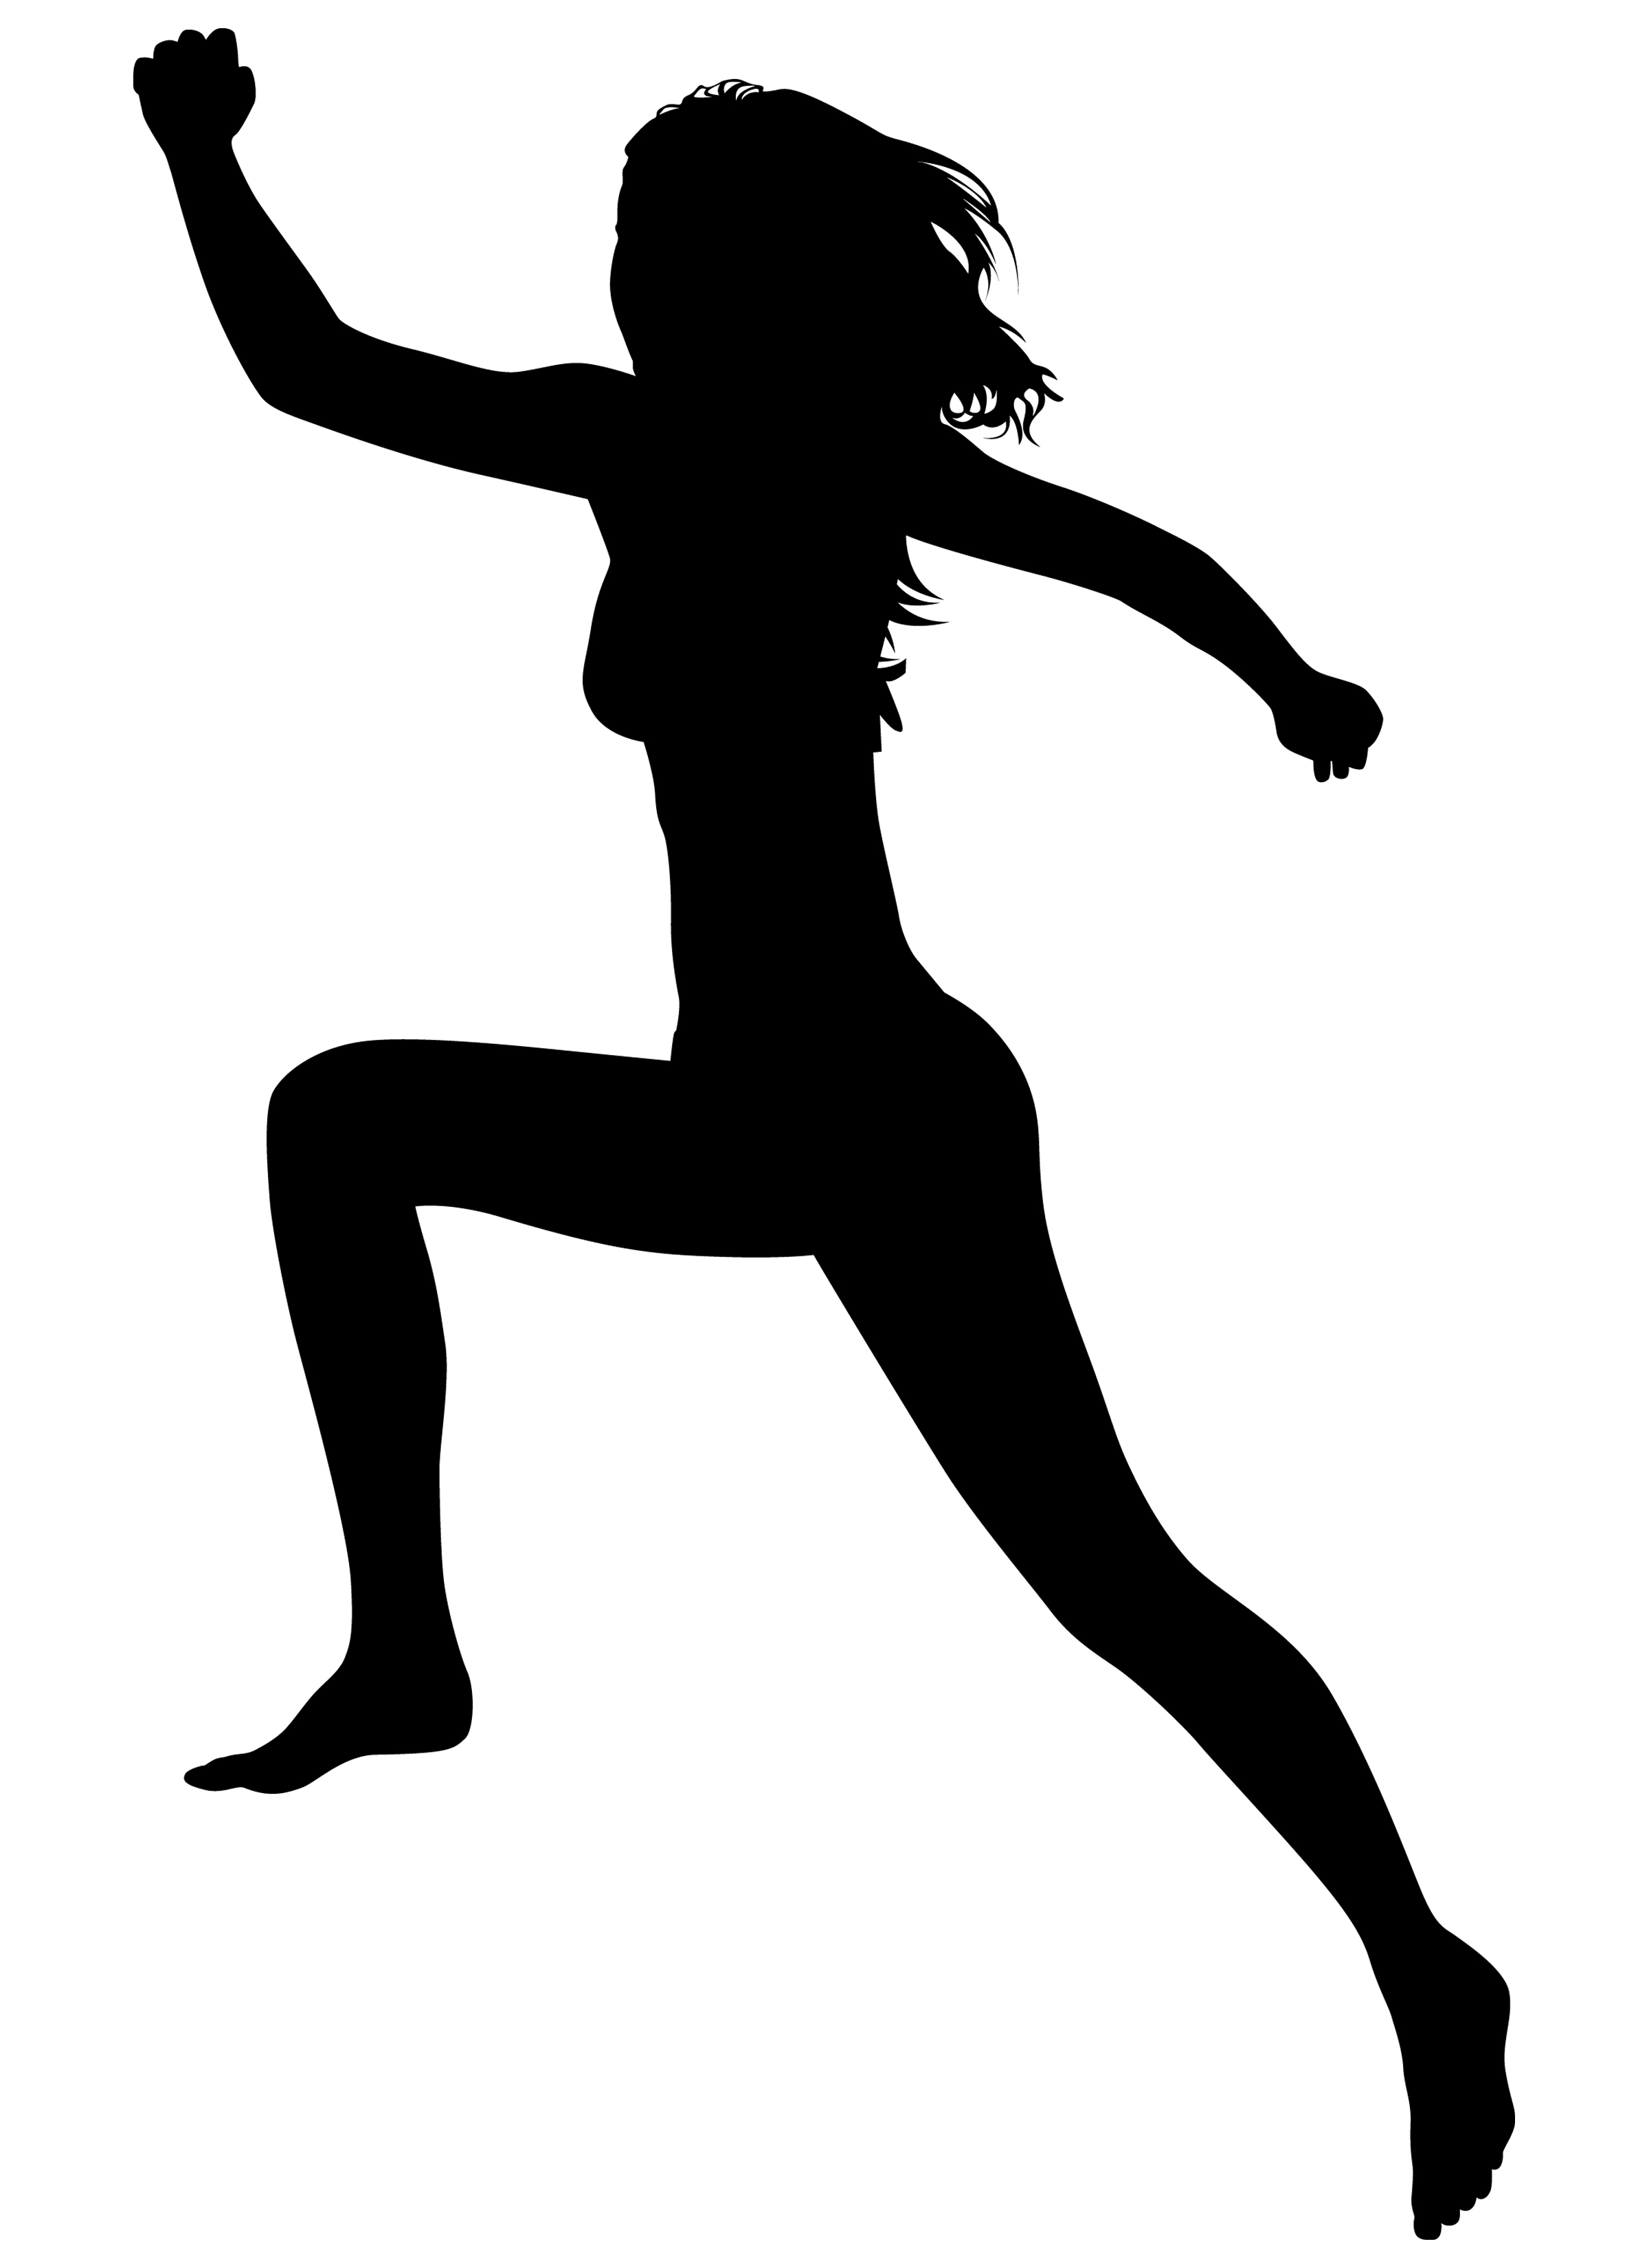 Free Exercise Silhouette Cliparts, Download Free Clip Art.